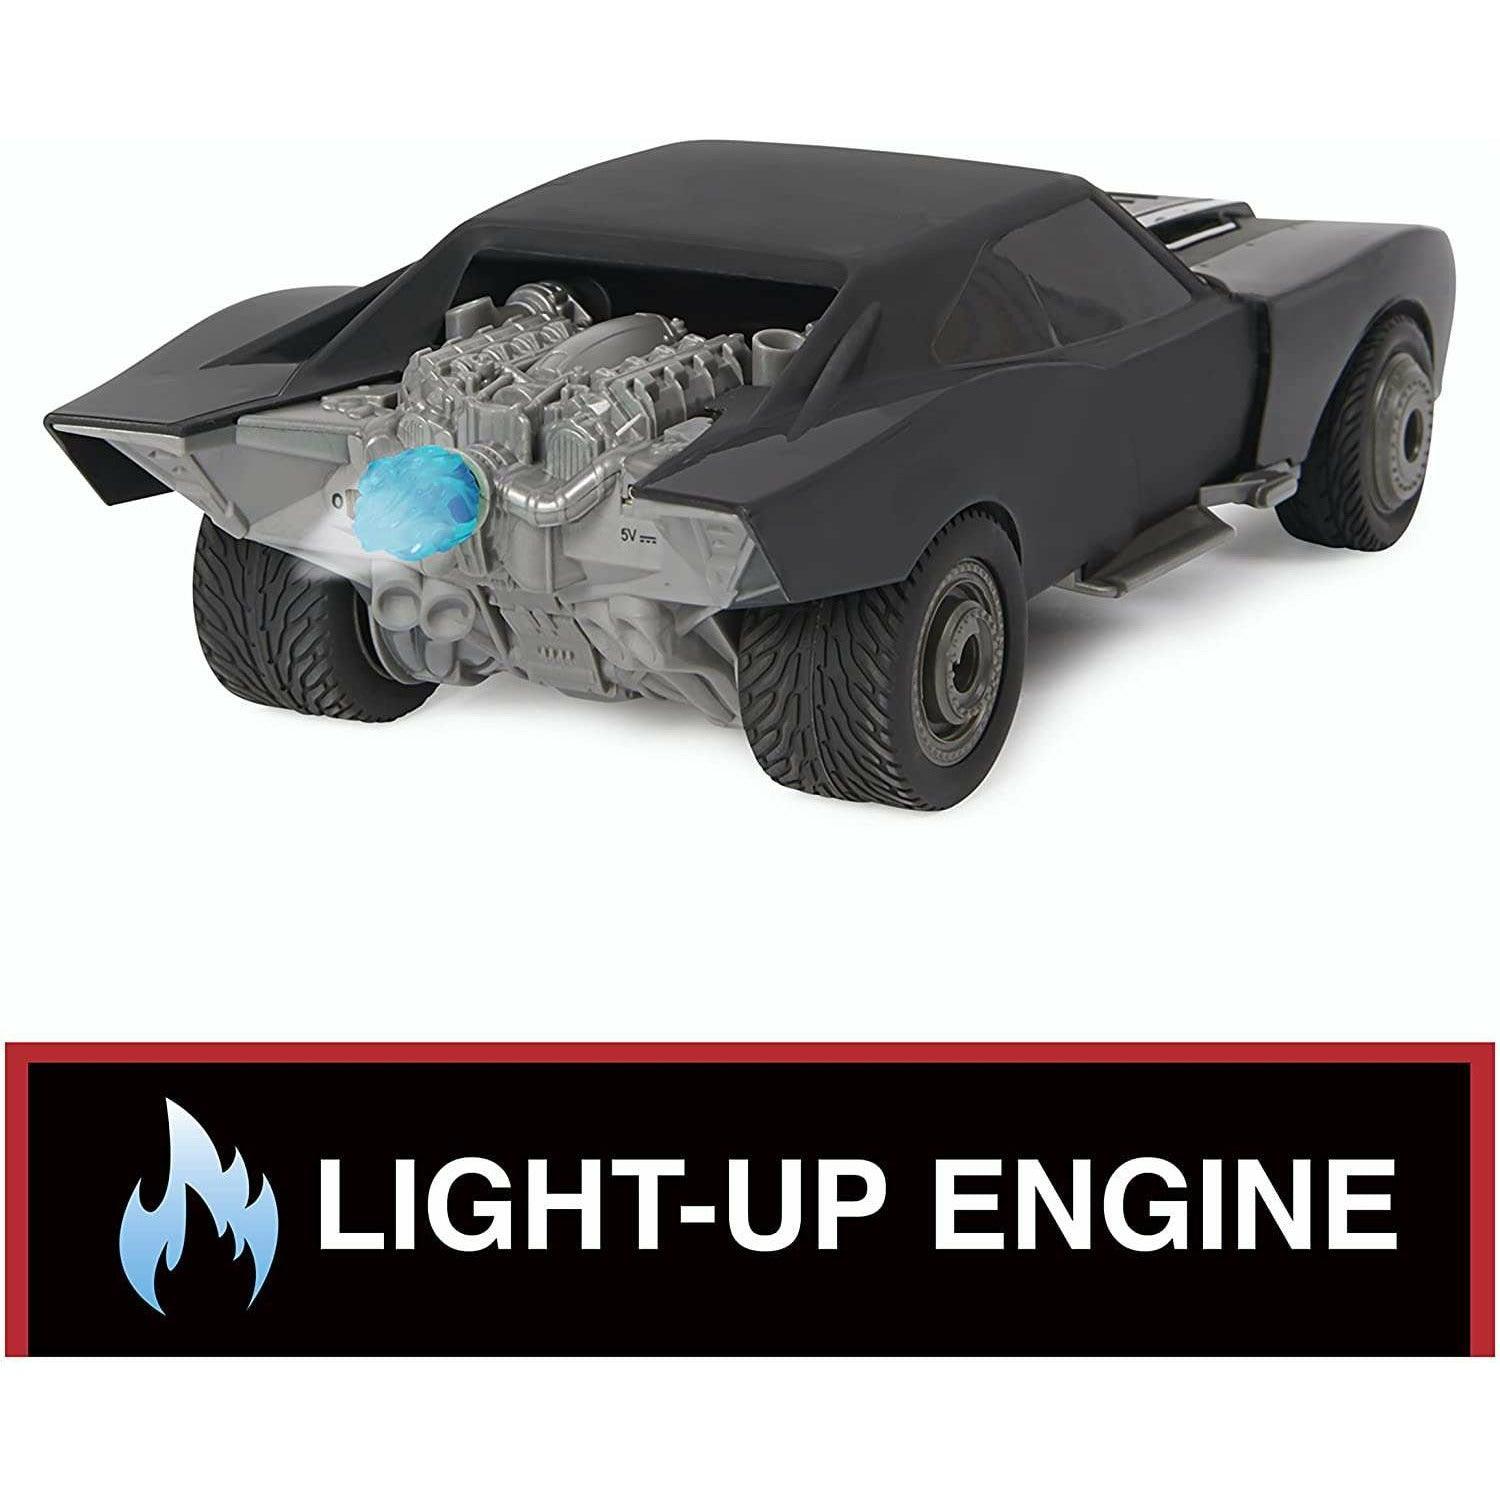 Spin Master Batmobile The Batman Turbo Boost Batmobile With Remote Control and USB 1:15 Scale - BumbleToys - 5-7 Years, Arabic Triangle Trading, Batman, Boys, Remote Control